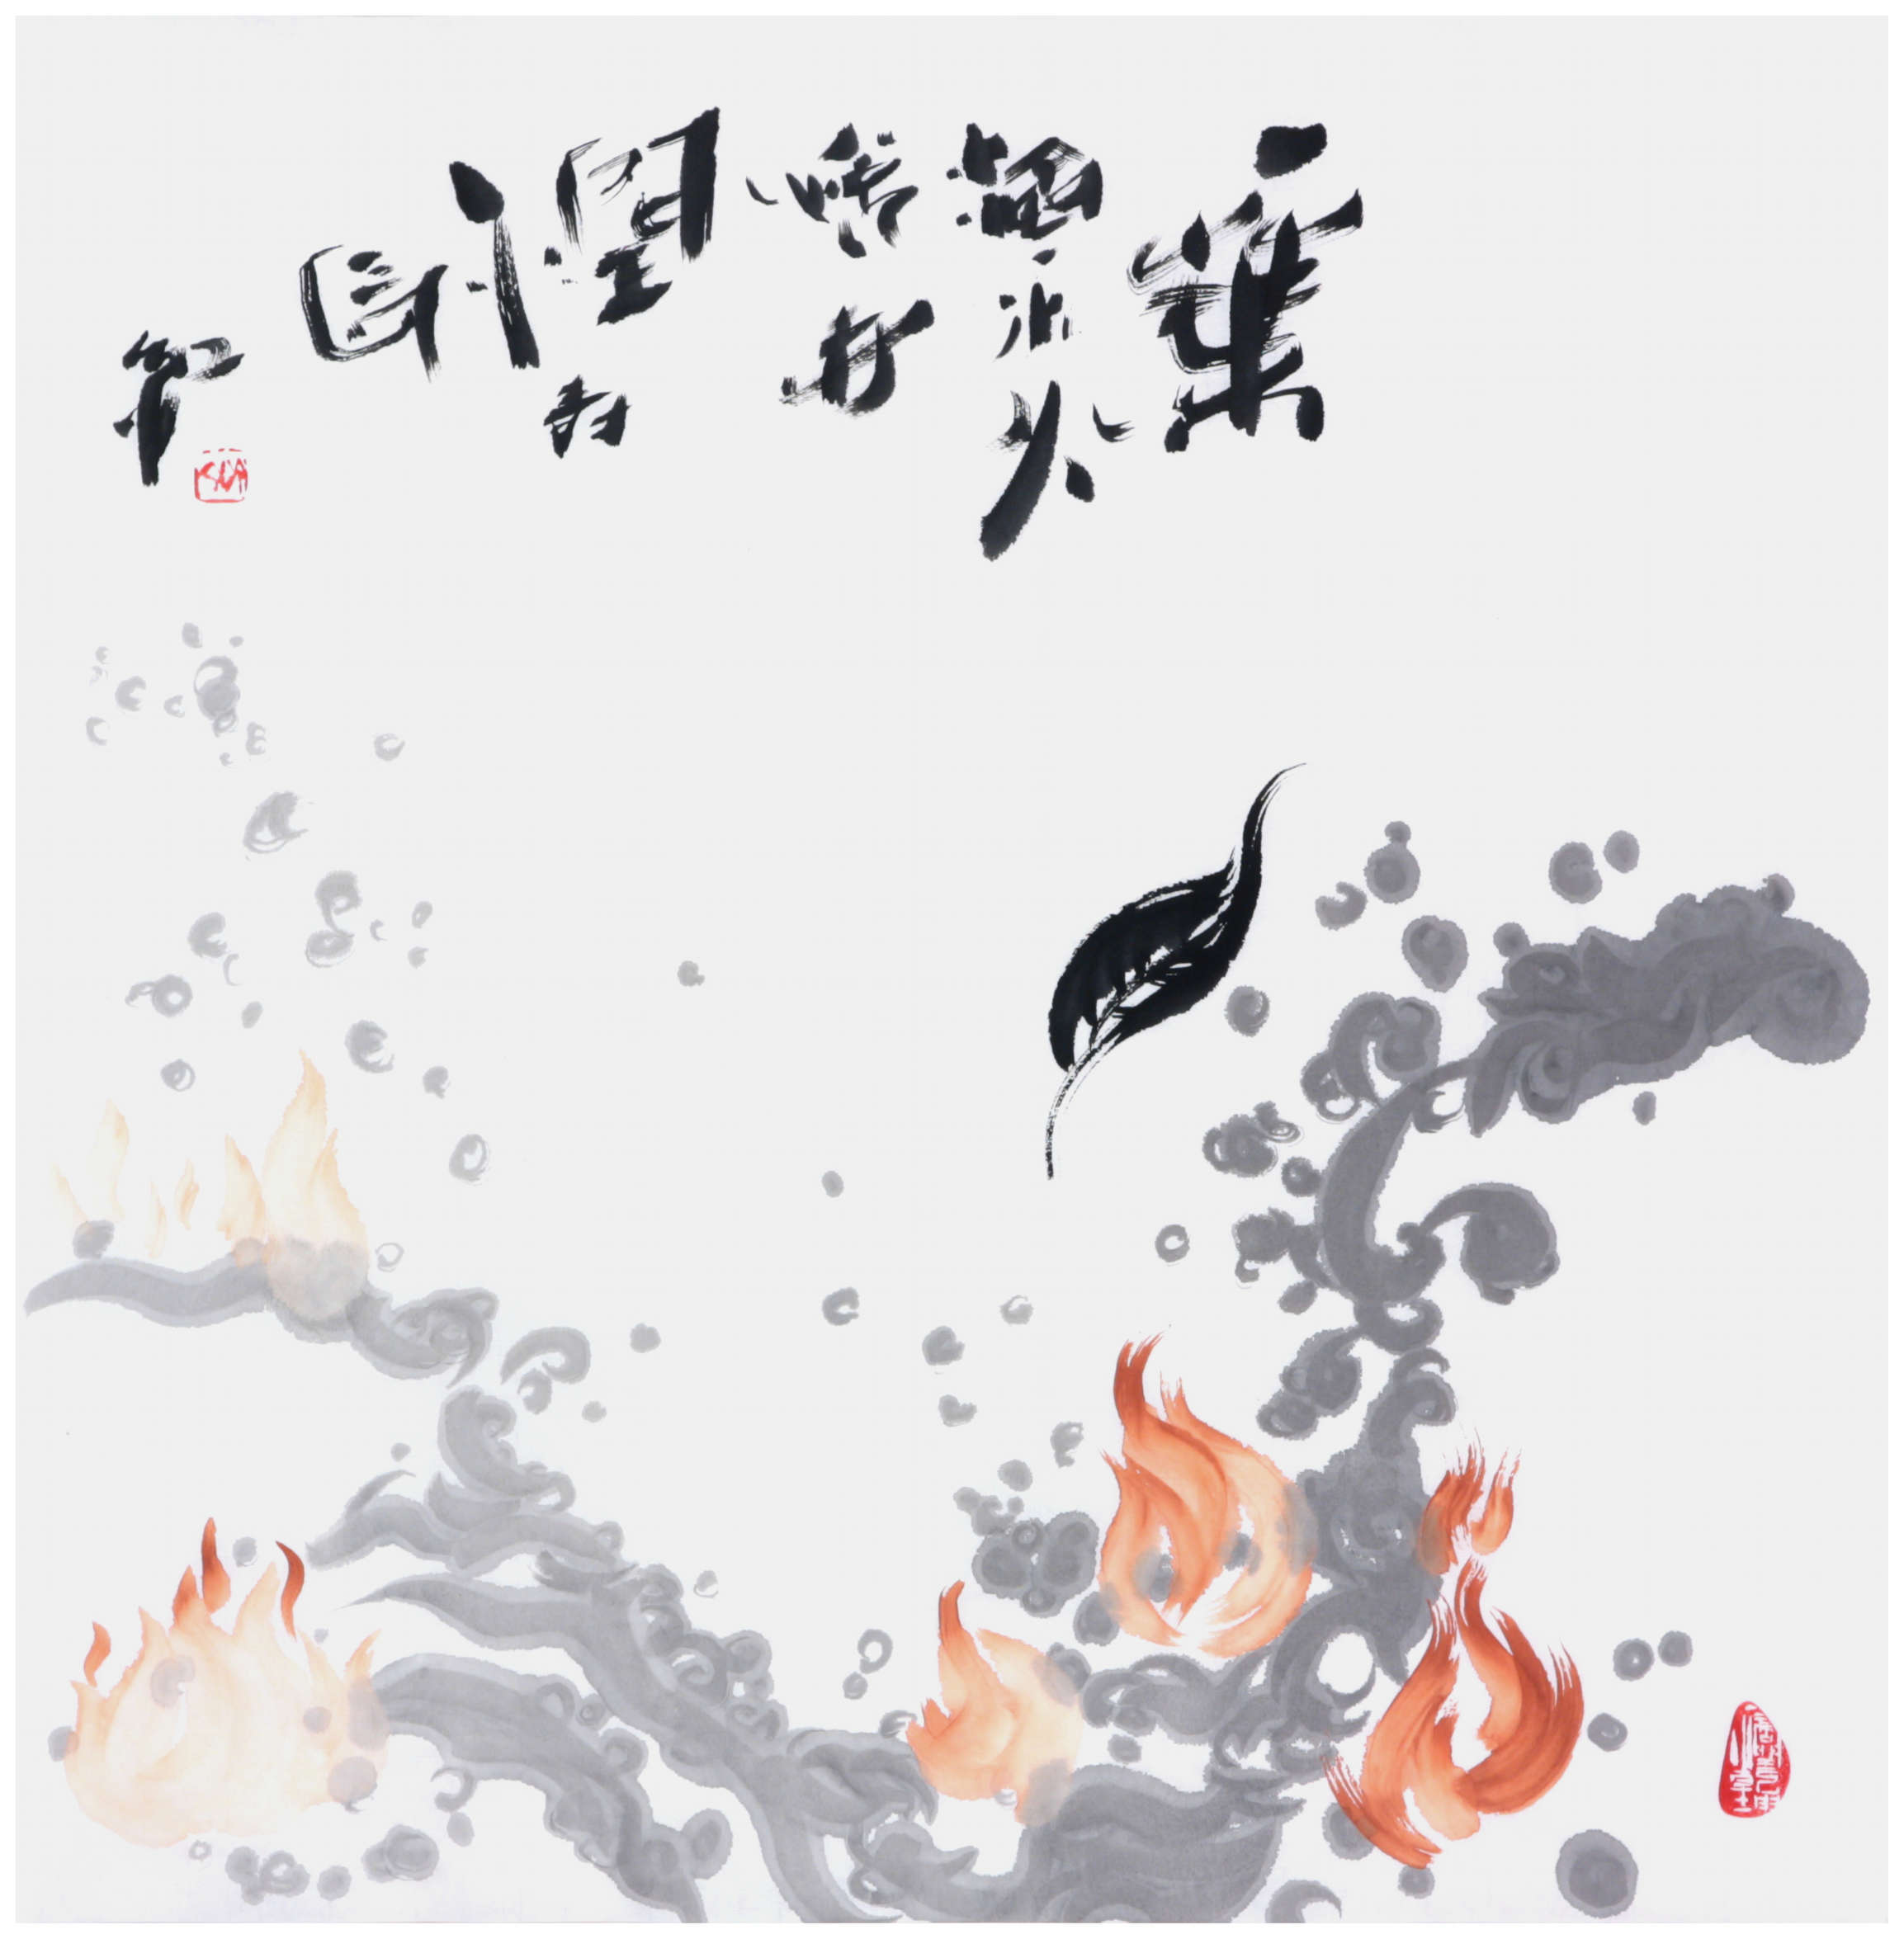 Sai Koh (Qi Hong)’s freehand brushwork Chinese painting (aka, imaginary painting,  literati painting,  ink wash painting, ink painting, ink brush painting): A Tea Leaf, 69×68cm, ink & color on Mian Liao Mian Lian Xuan paper